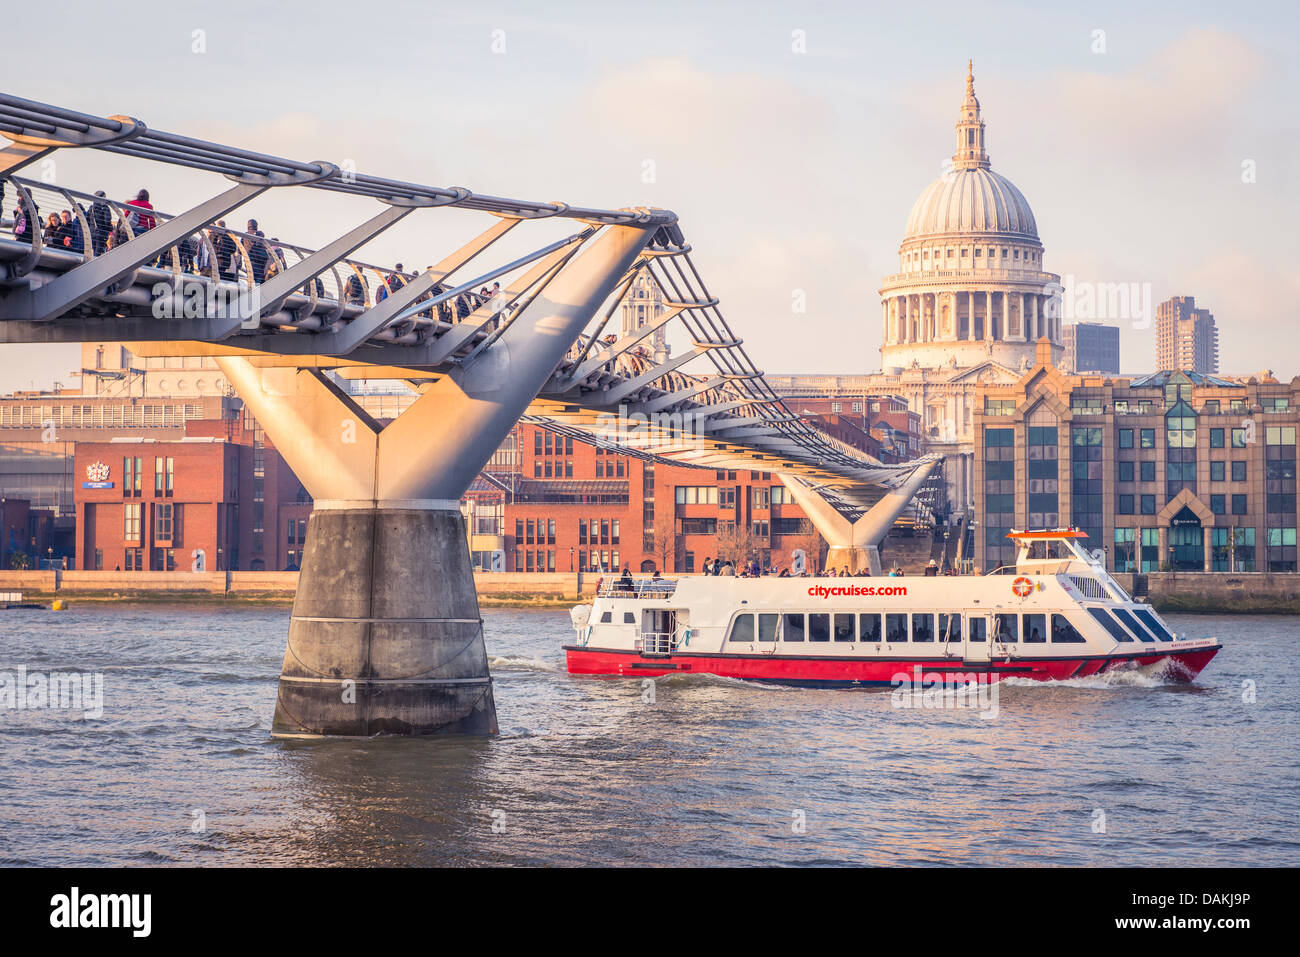 A tourist speed boat passes under the Millennium bridge, London with St. Paul's cathedral in the background Stock Photo